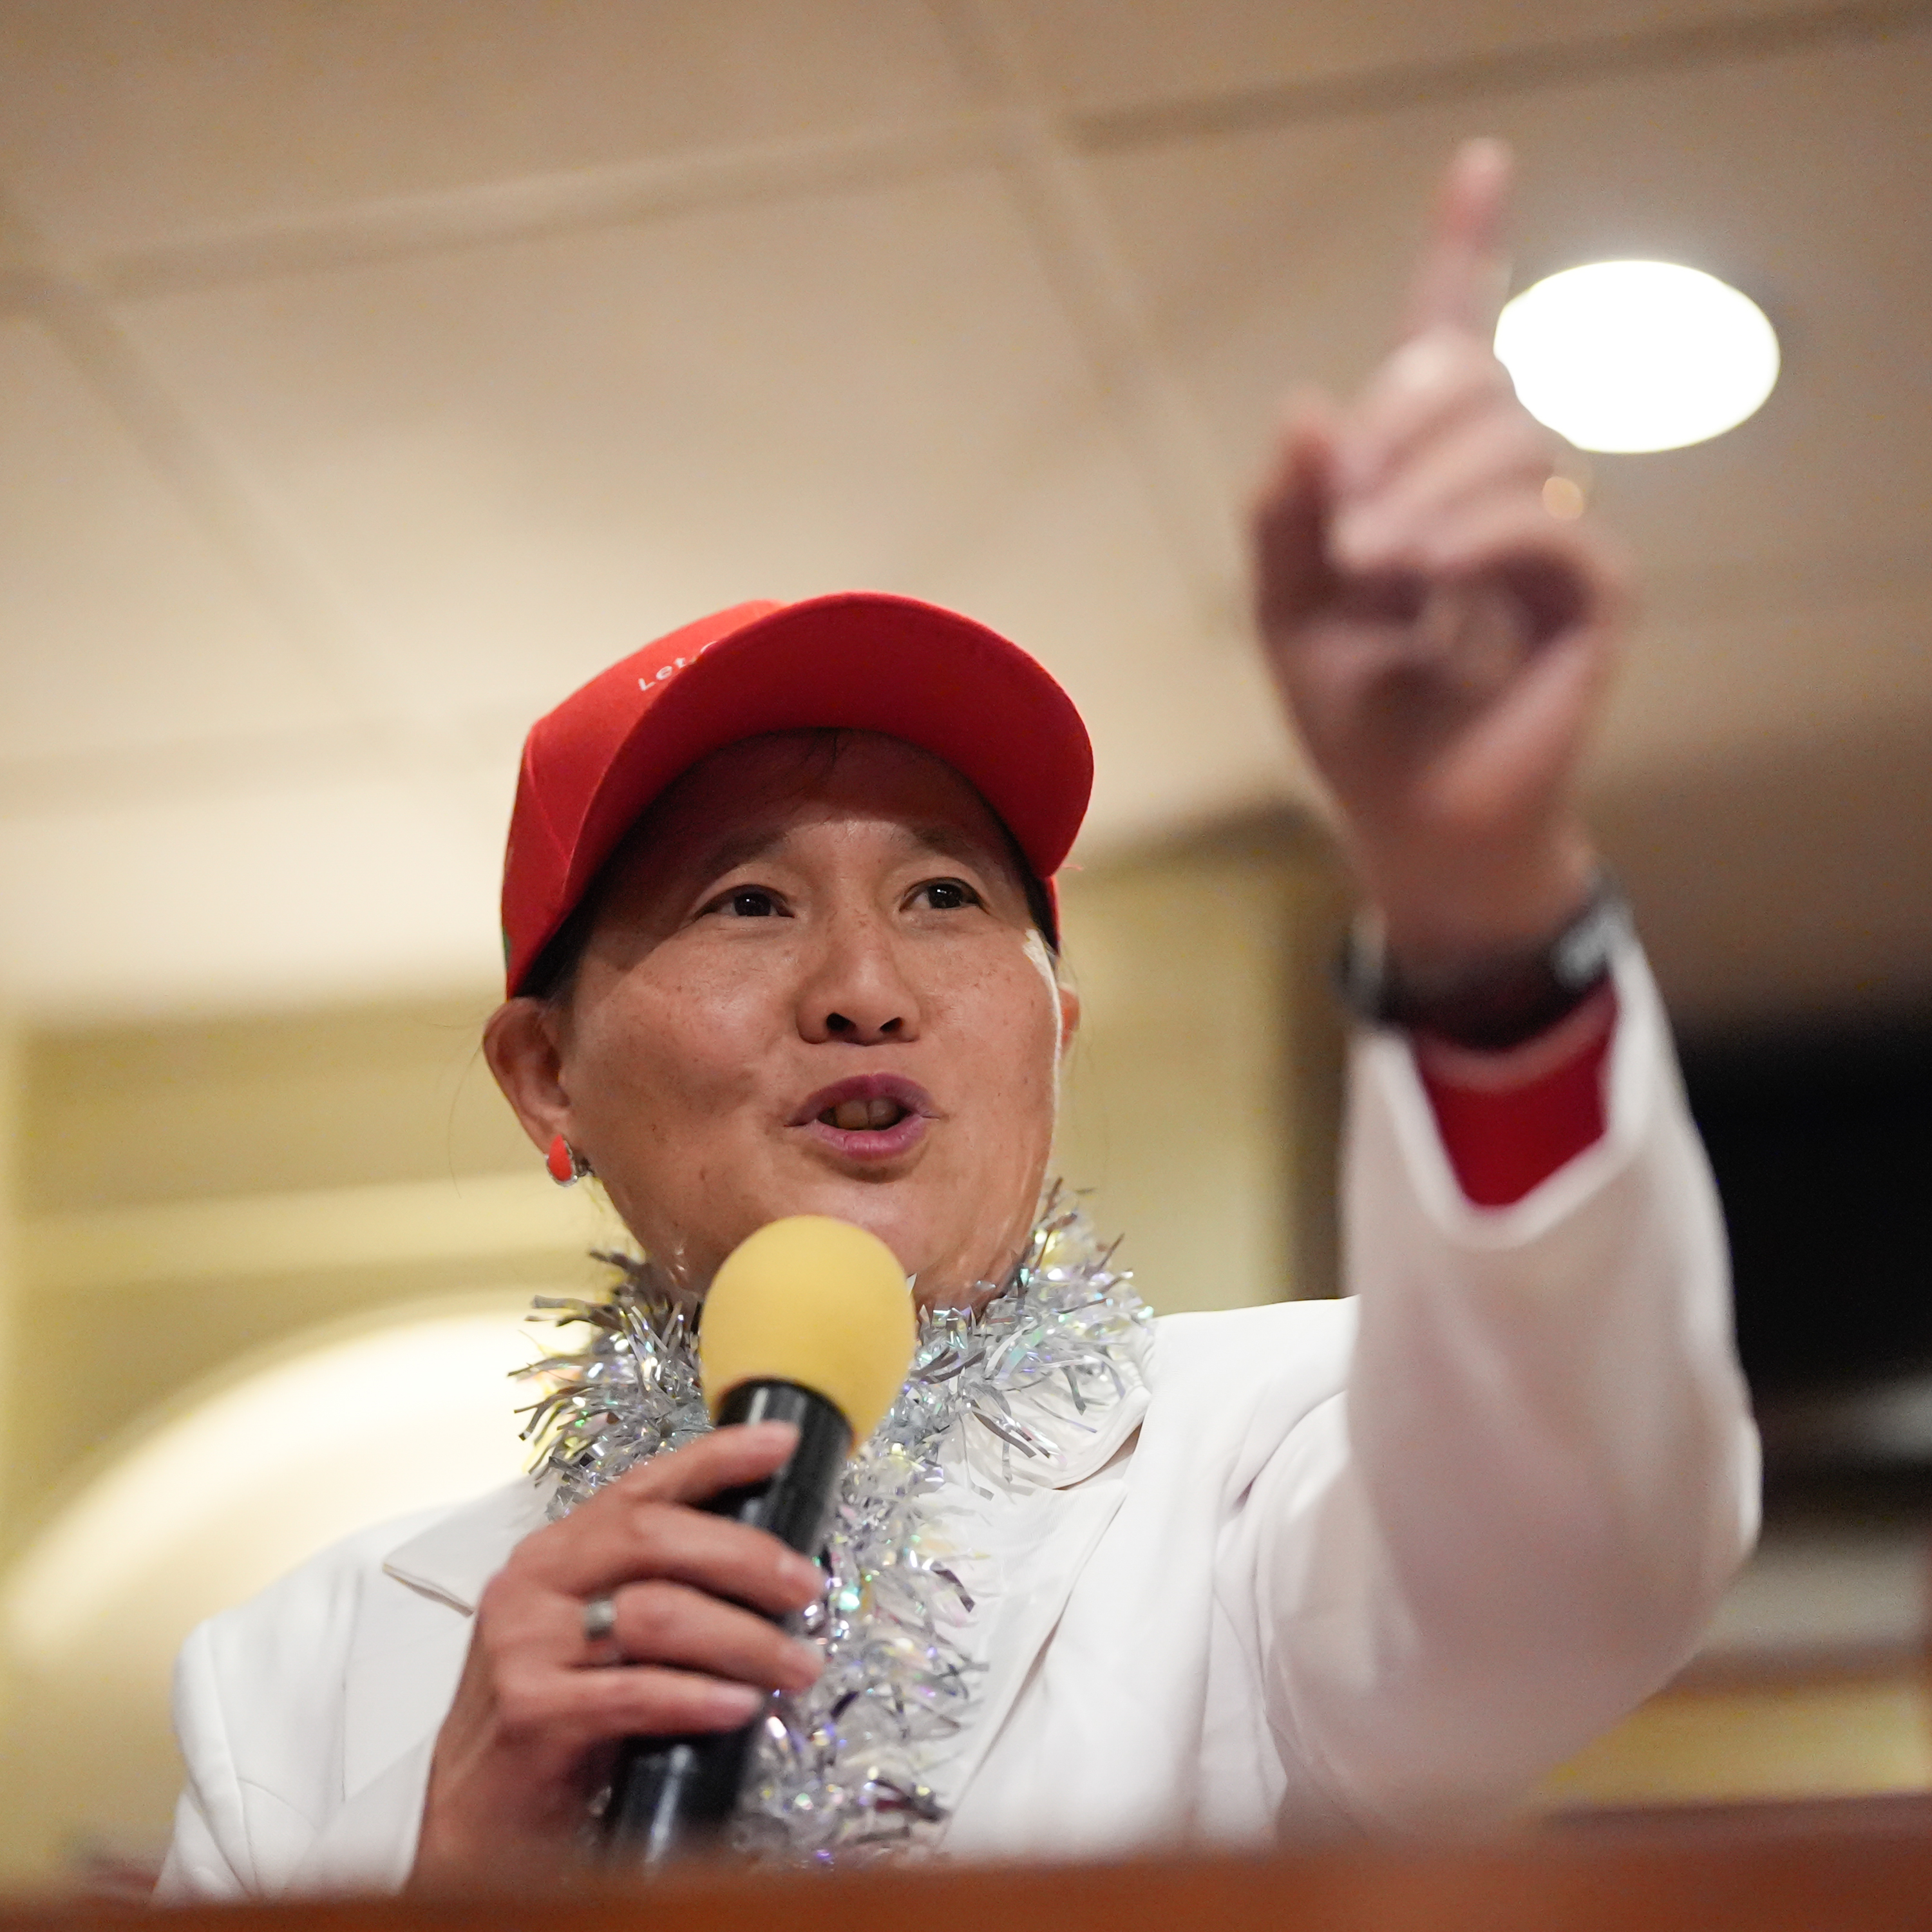 A person in a red cap and tinsel speaking into a microphone, gesturing upwards with one finger.